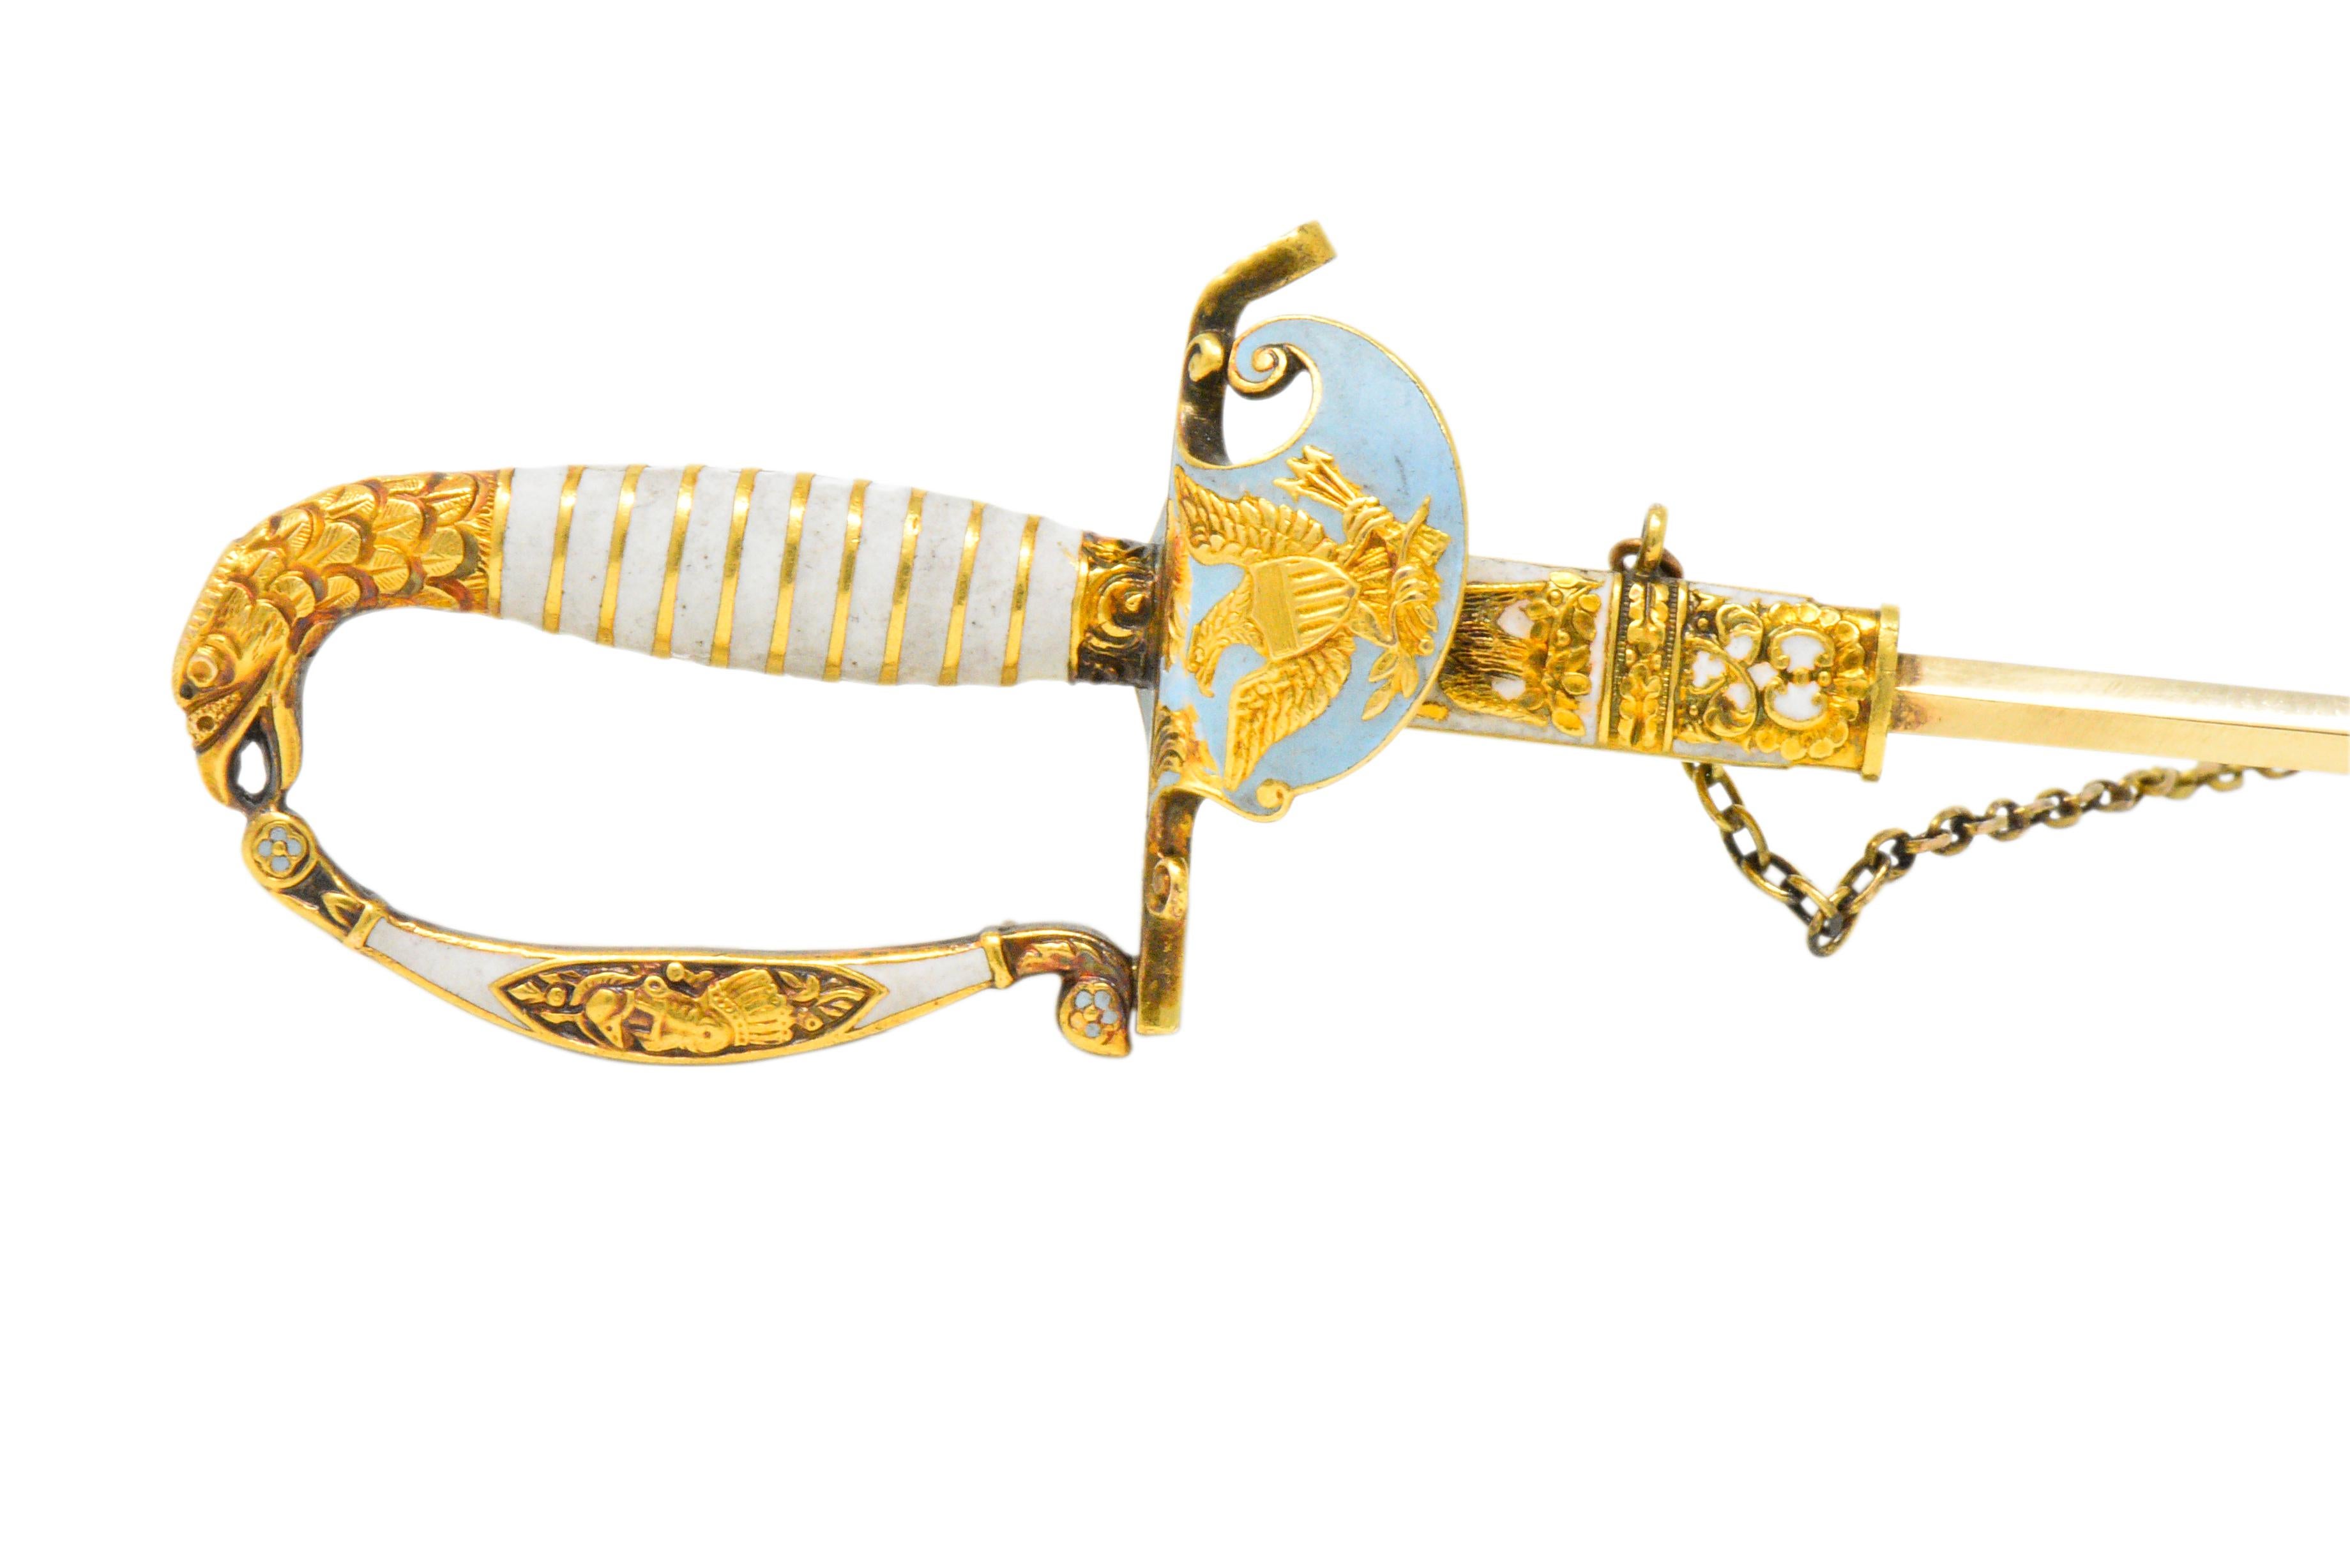 Designed as a military saber with chain and removable sheath 

Featuring white and blue enamel (minor loss)

Highly detailed gold engraving with eagle head handle and American seal

Tested as 18 karat, sword blade tested as 14 karat

Total Length: 5